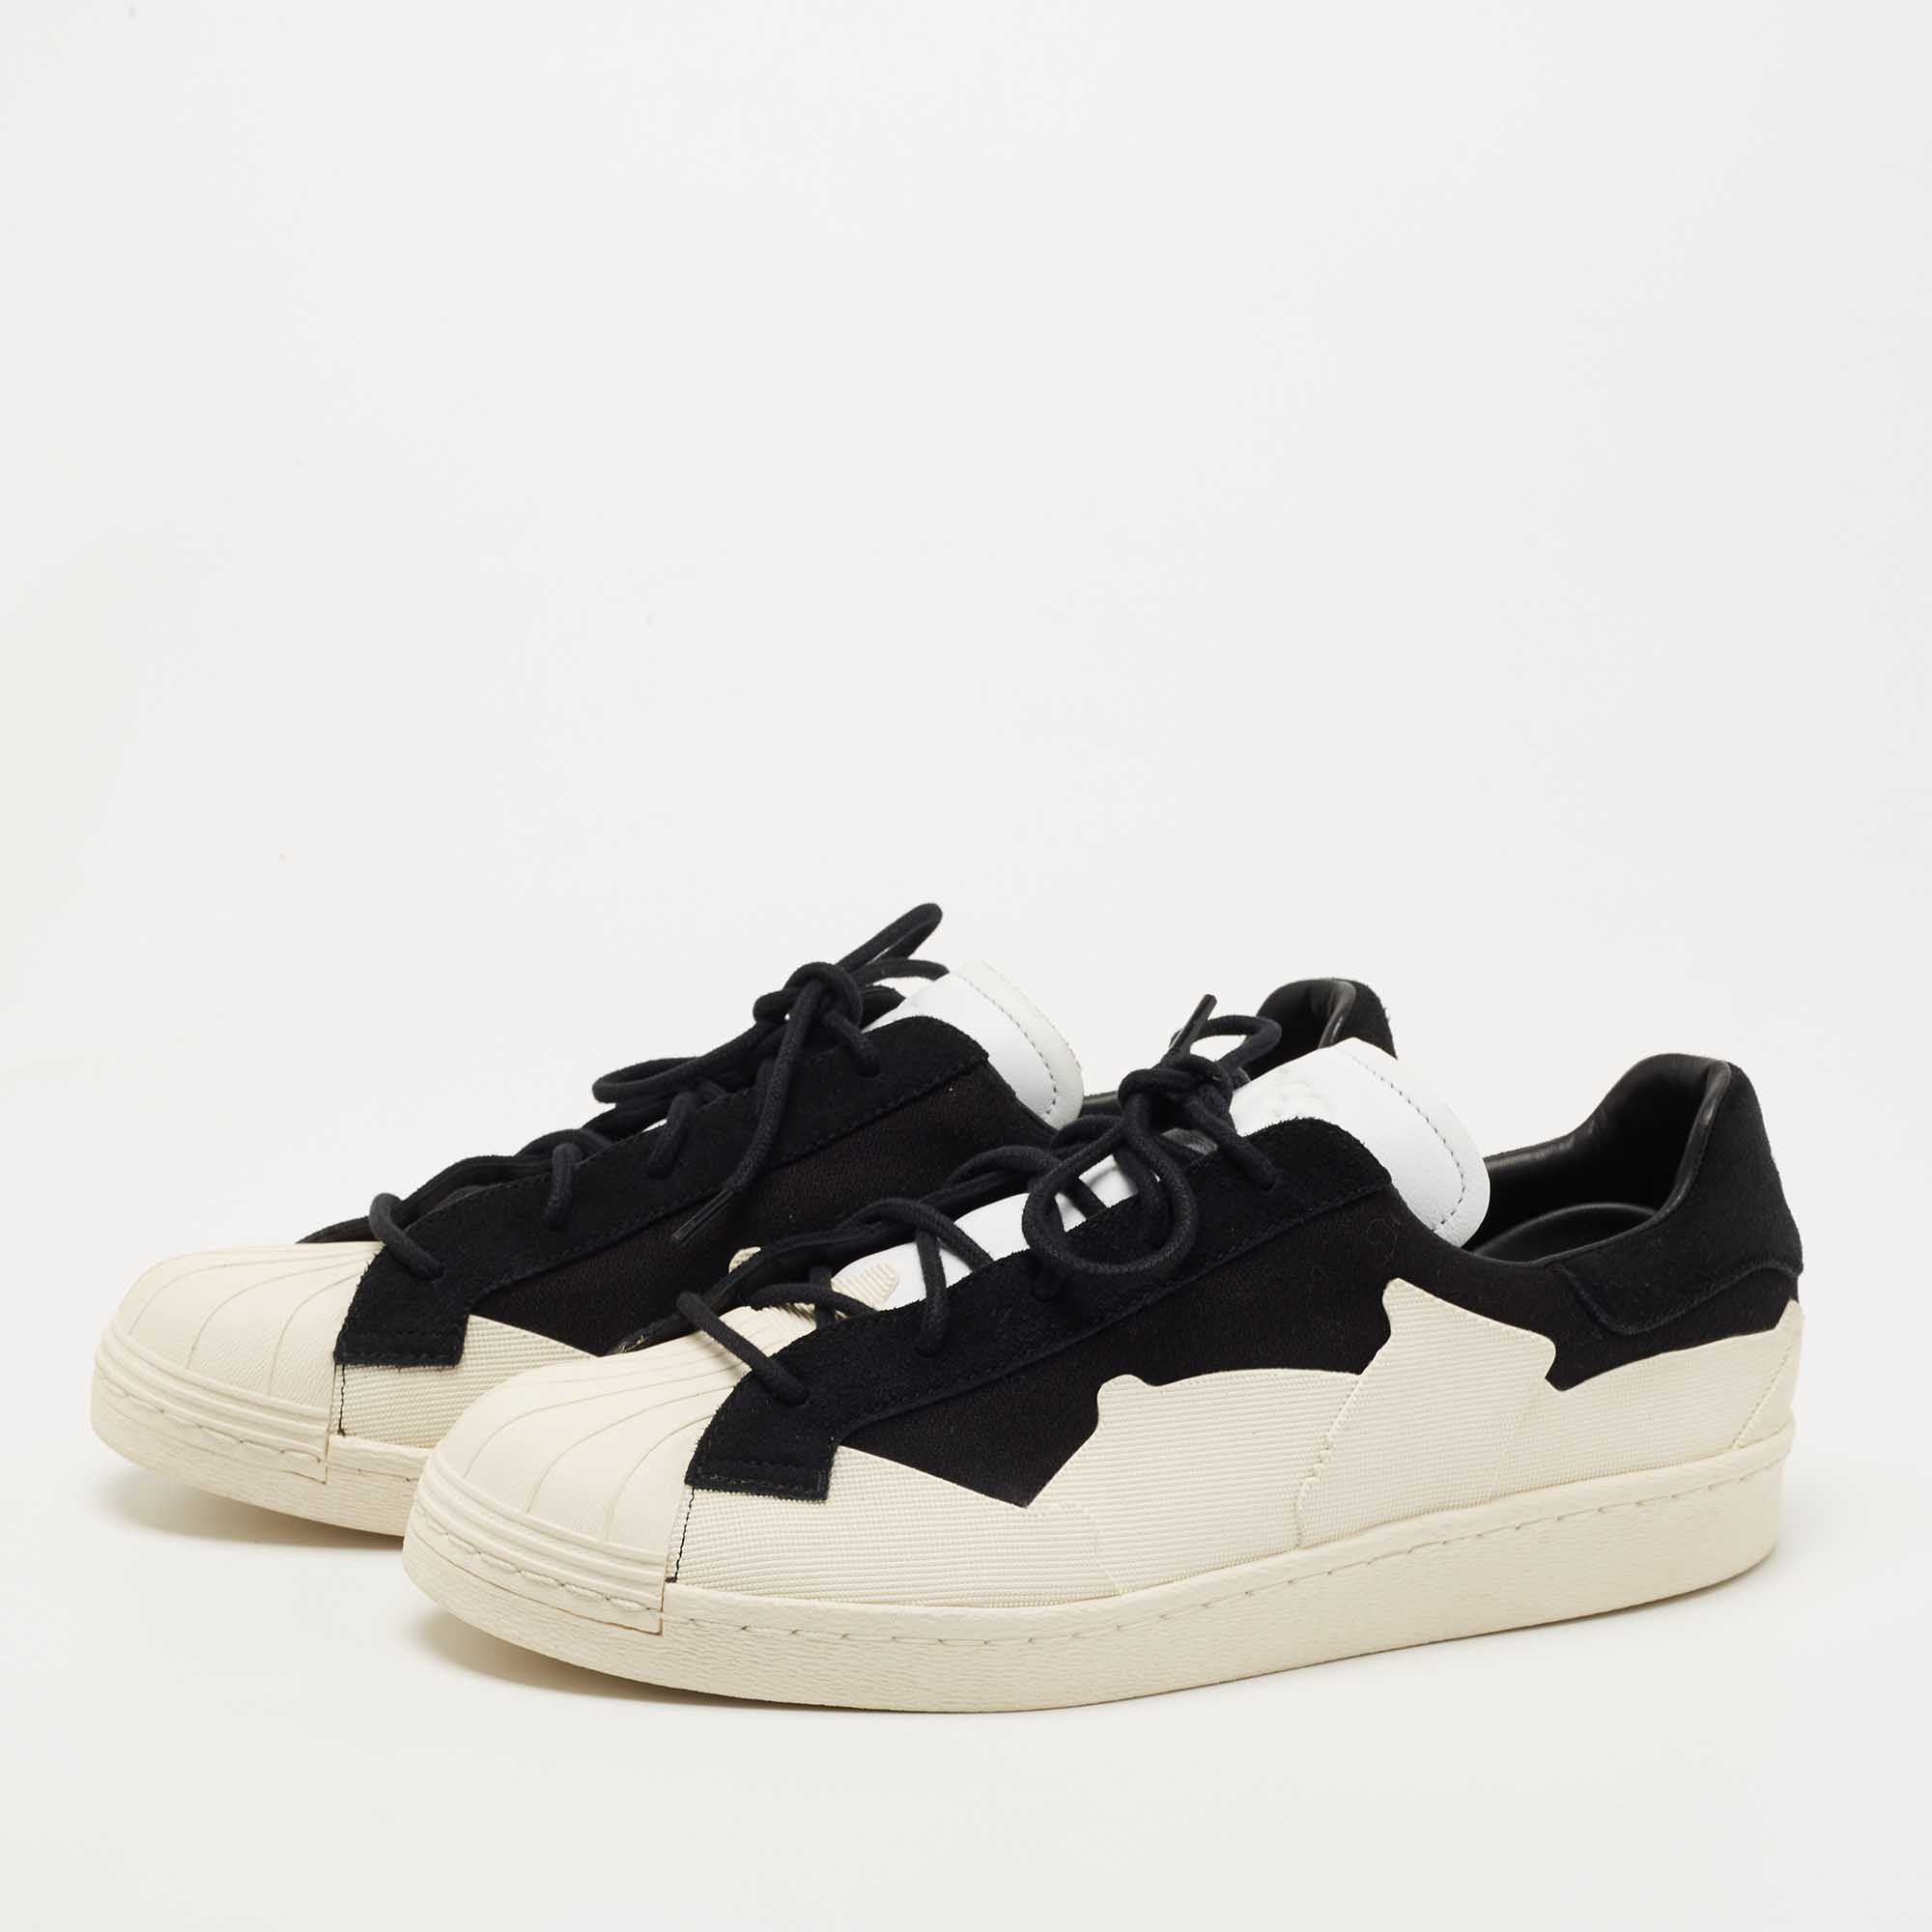 

Y-3 Black/White Suede and Rubber Super Takusan Sneakers Size  1/3